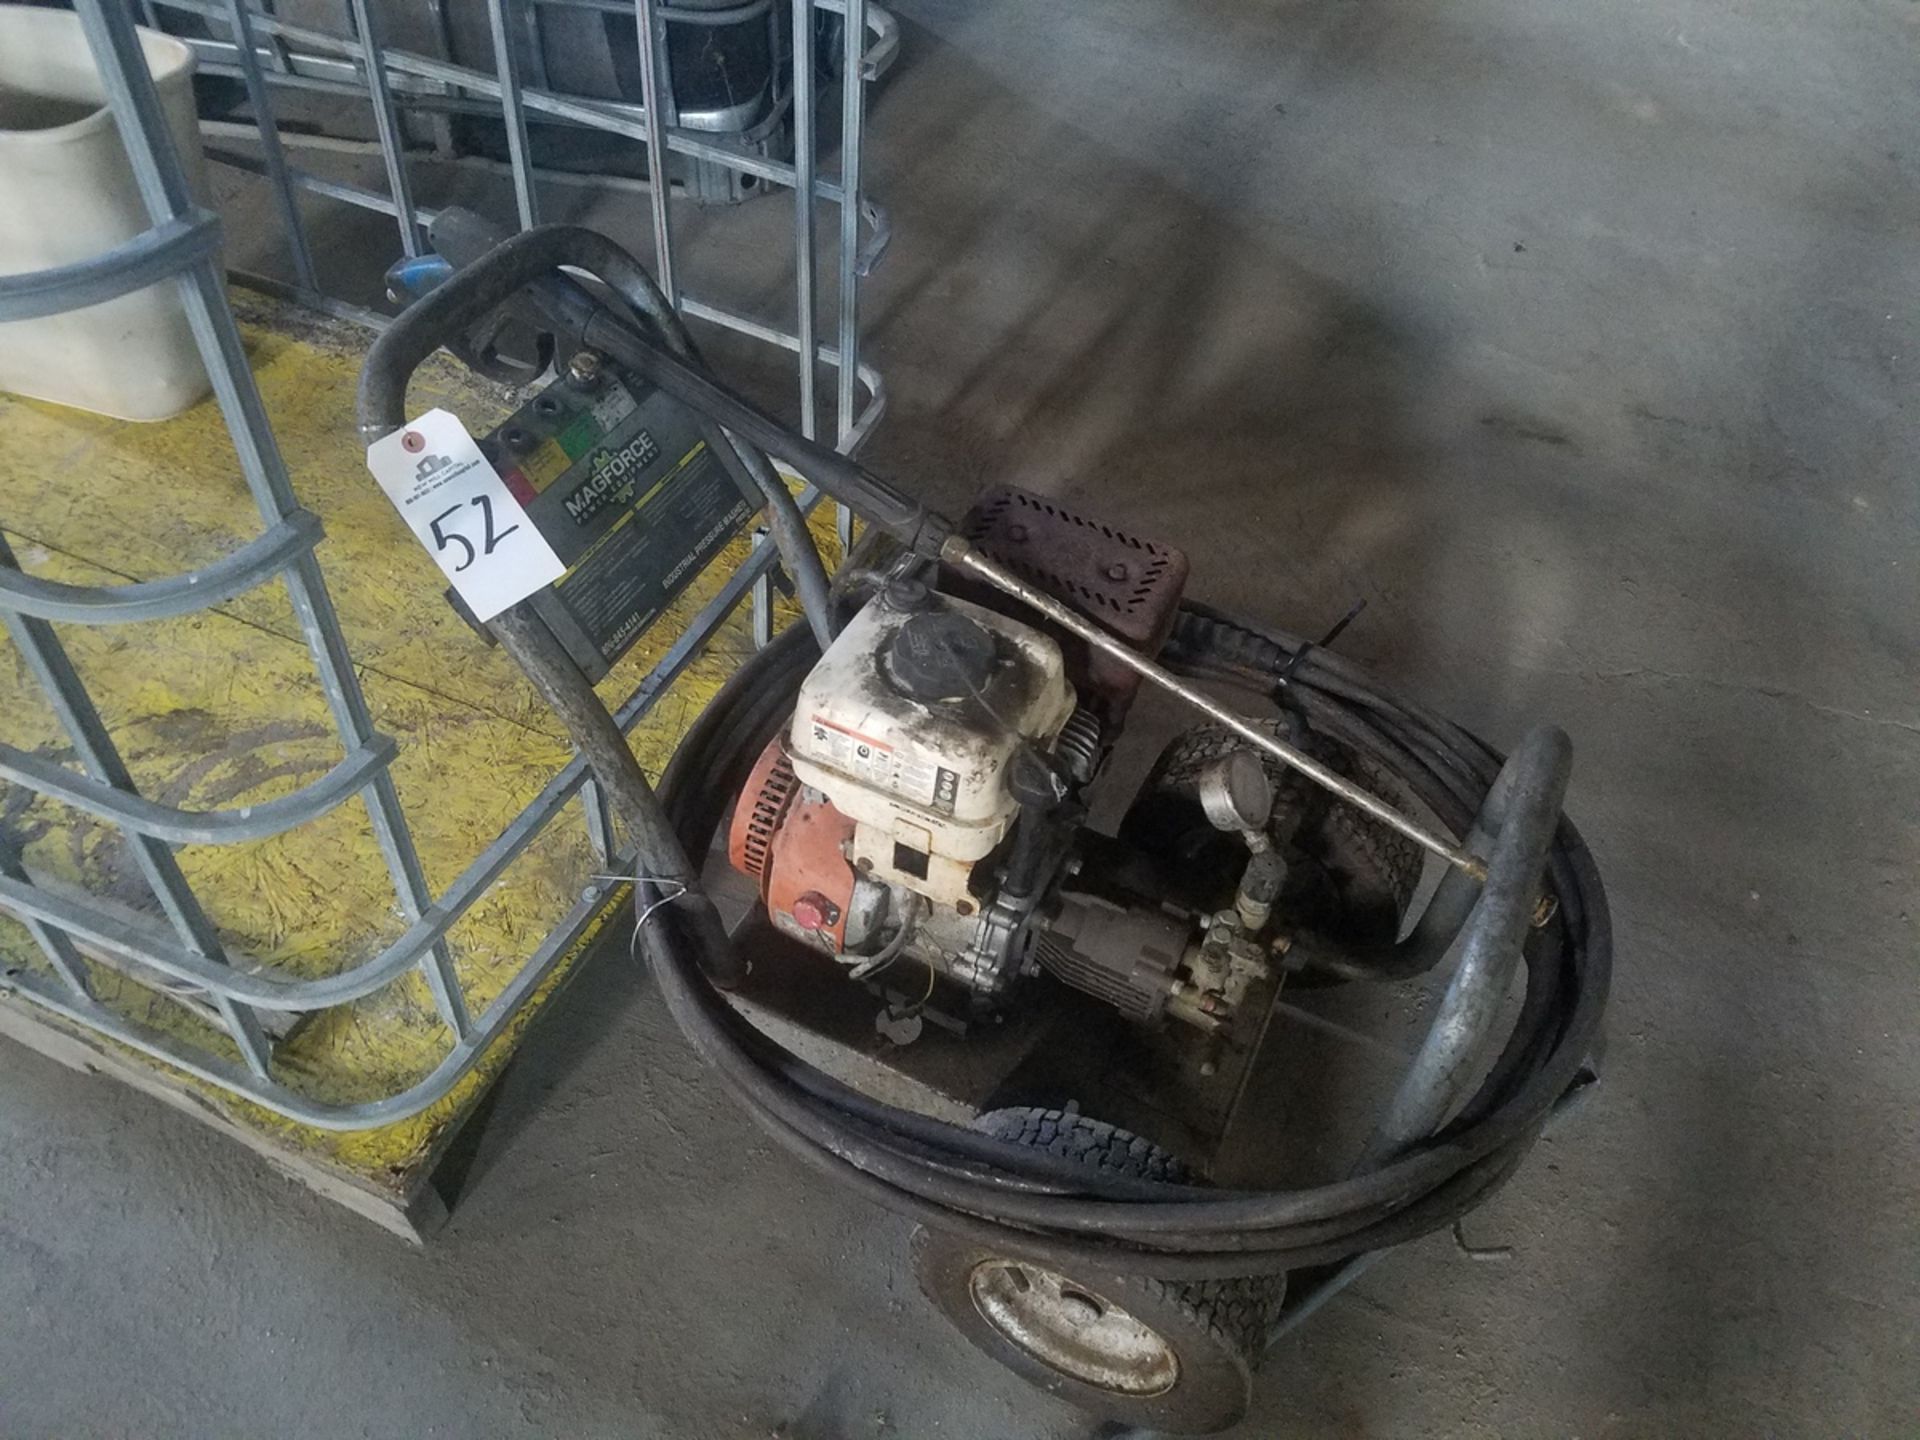 Magforce Industrial Pressure Washer | Rig Fee: $25